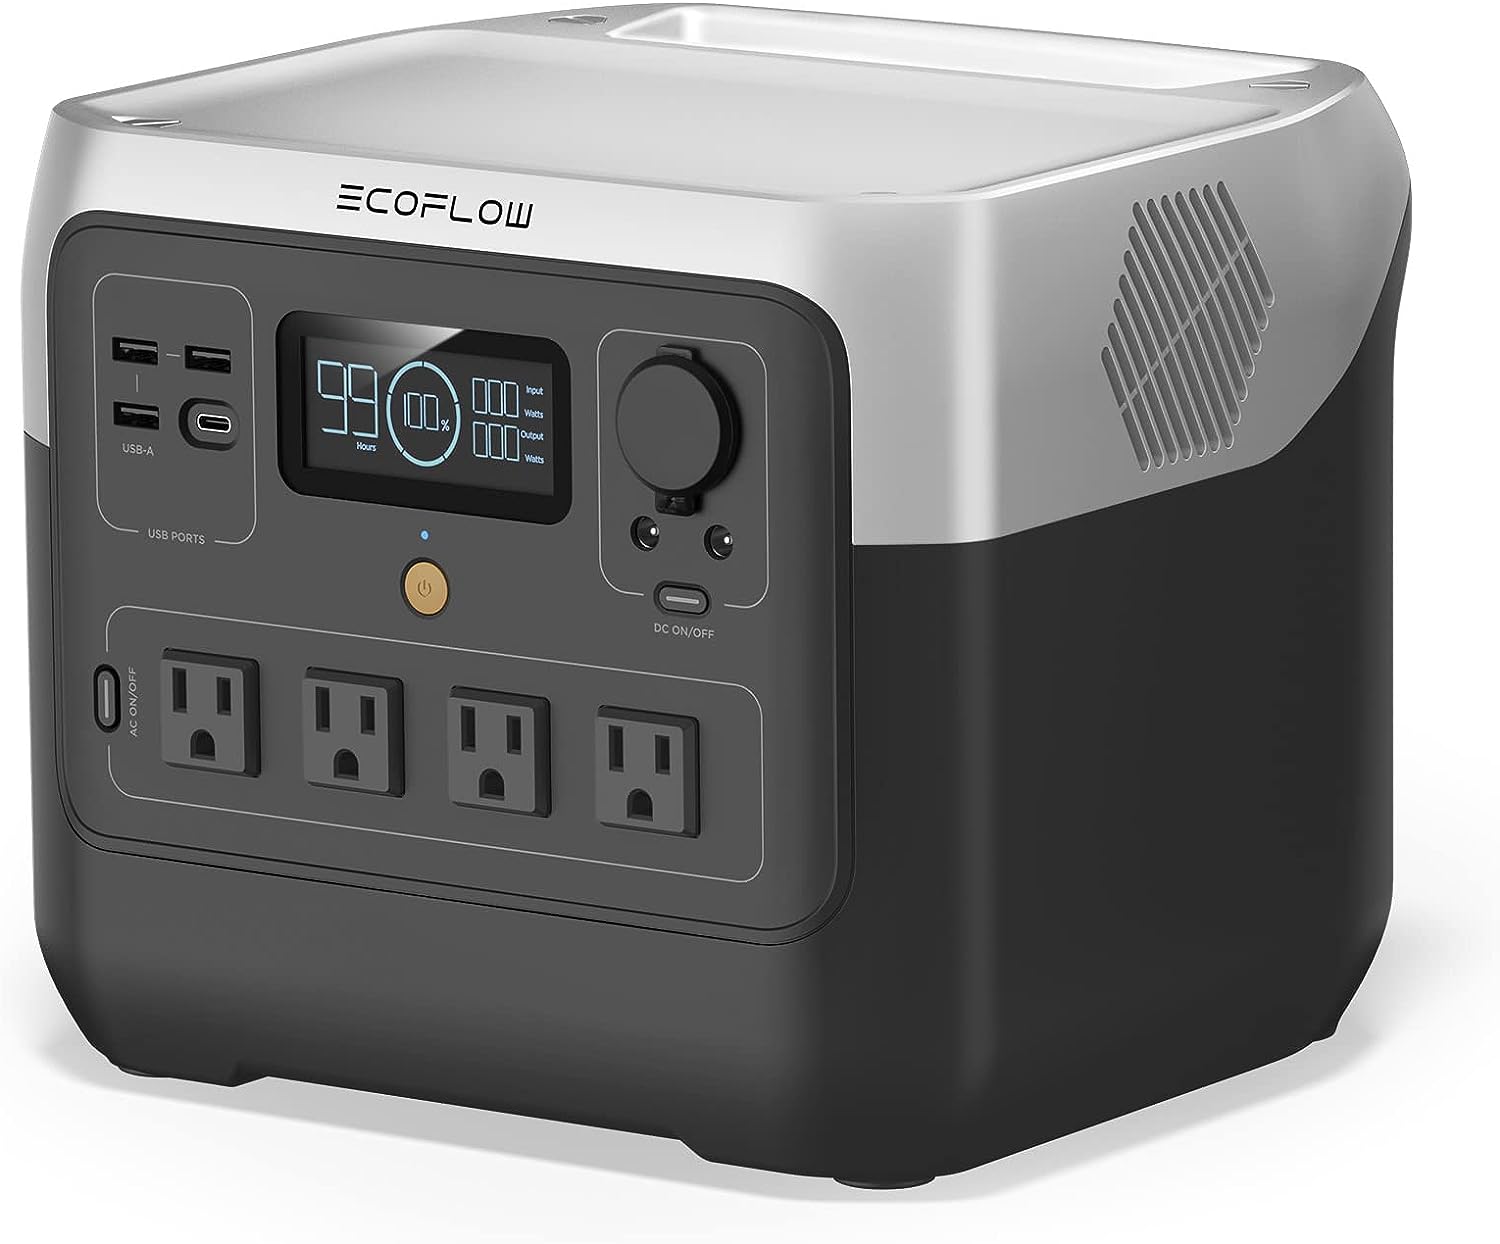 EF ECOFLOW Portable Power Station RIVER 2 Pro, 768Wh LiFePO4 Battery, 70 Min Fast Charging, 4X800W (X-Boost 1600W) $399